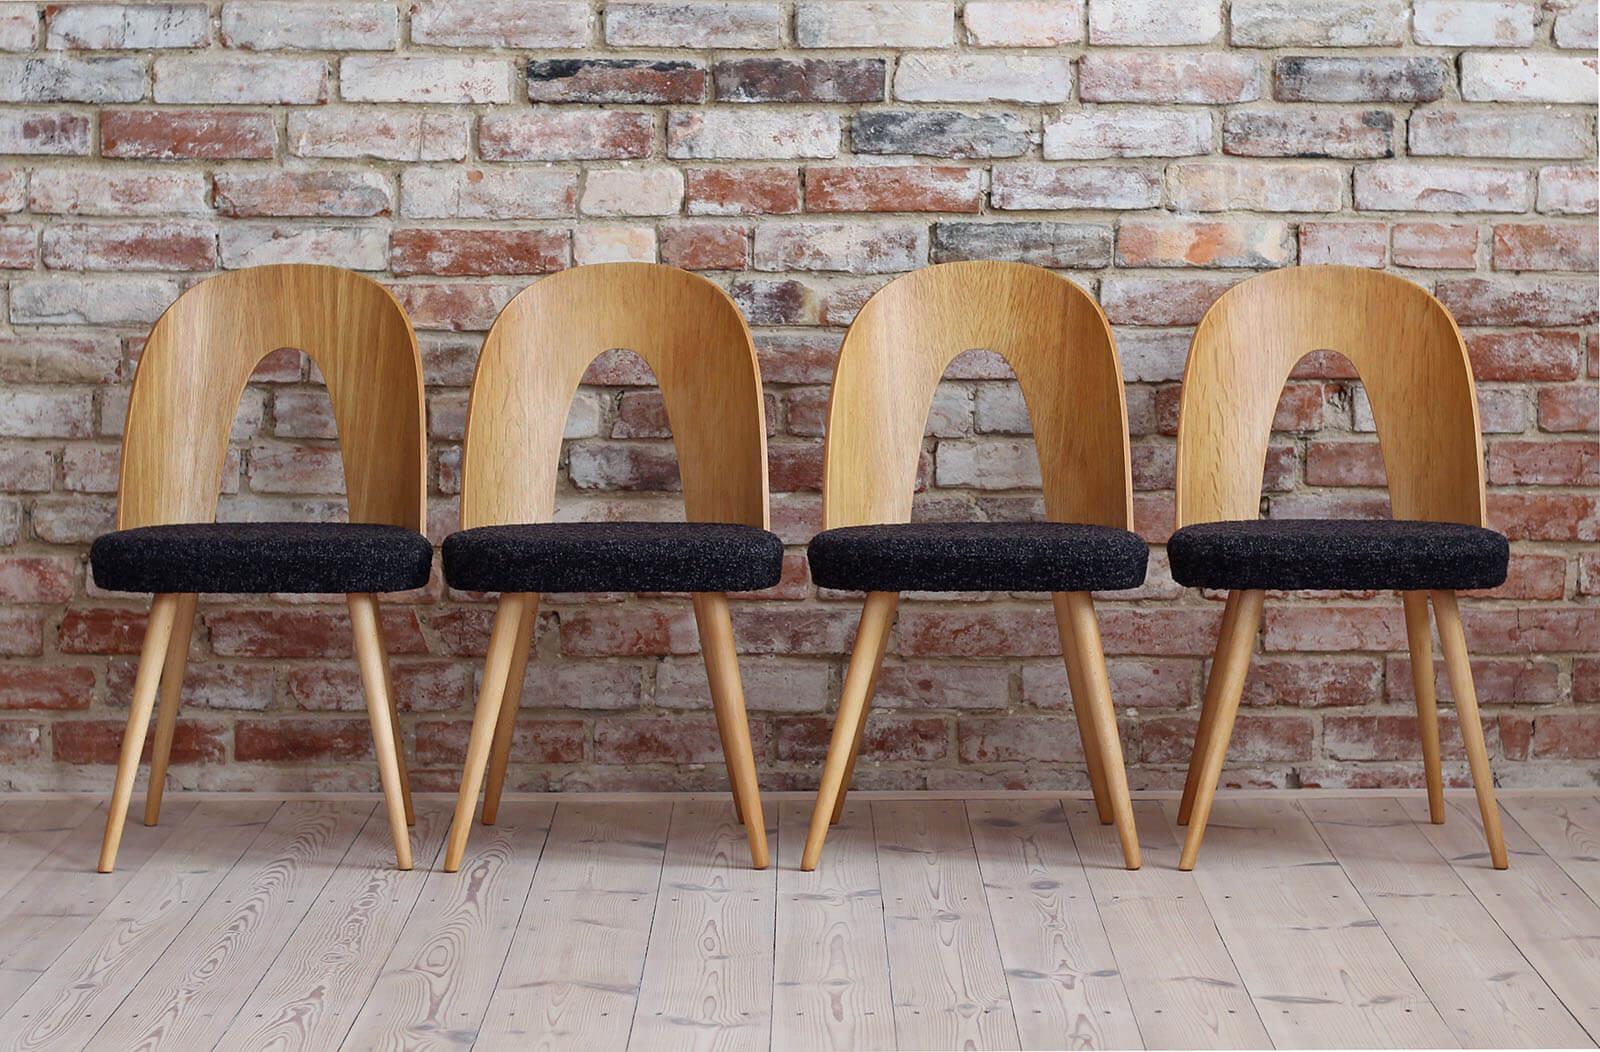 This set of four vintage dining chairs was designed by Czech designer Antonin Šuman in the 1960s. Produced by Tatra Nabytek. The chairs have been completely restored finished with natural oil that gave them natural and warm look. The set is